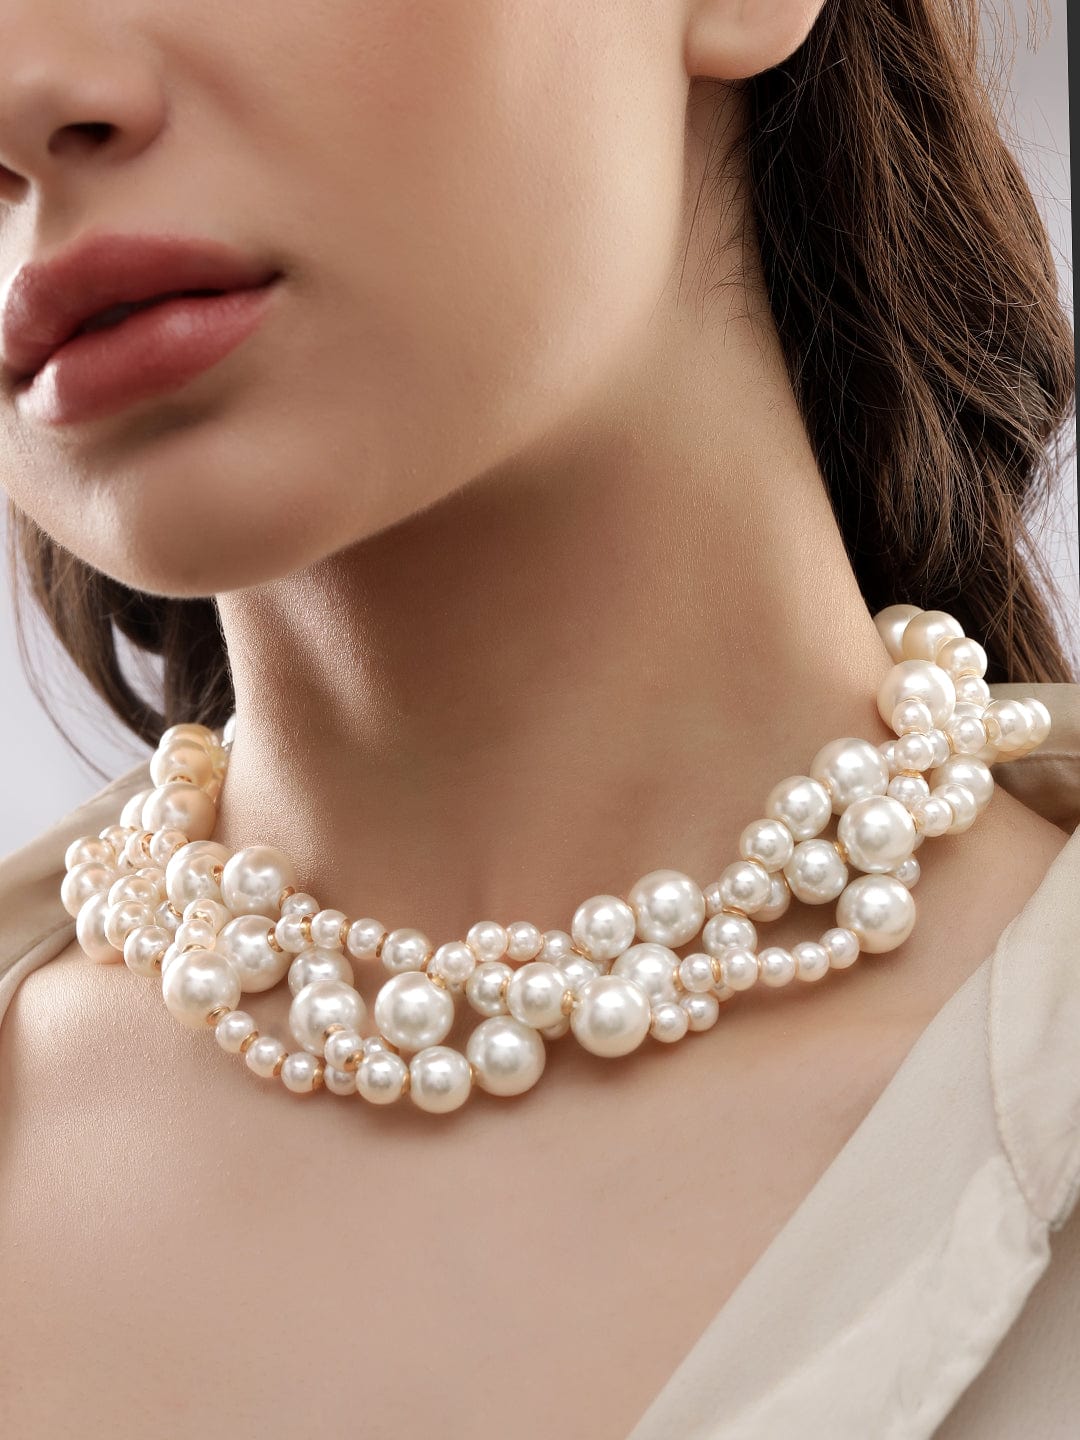 Rubans Cream Pearl Beaded Multilayered Chunky Necklace Necklaces